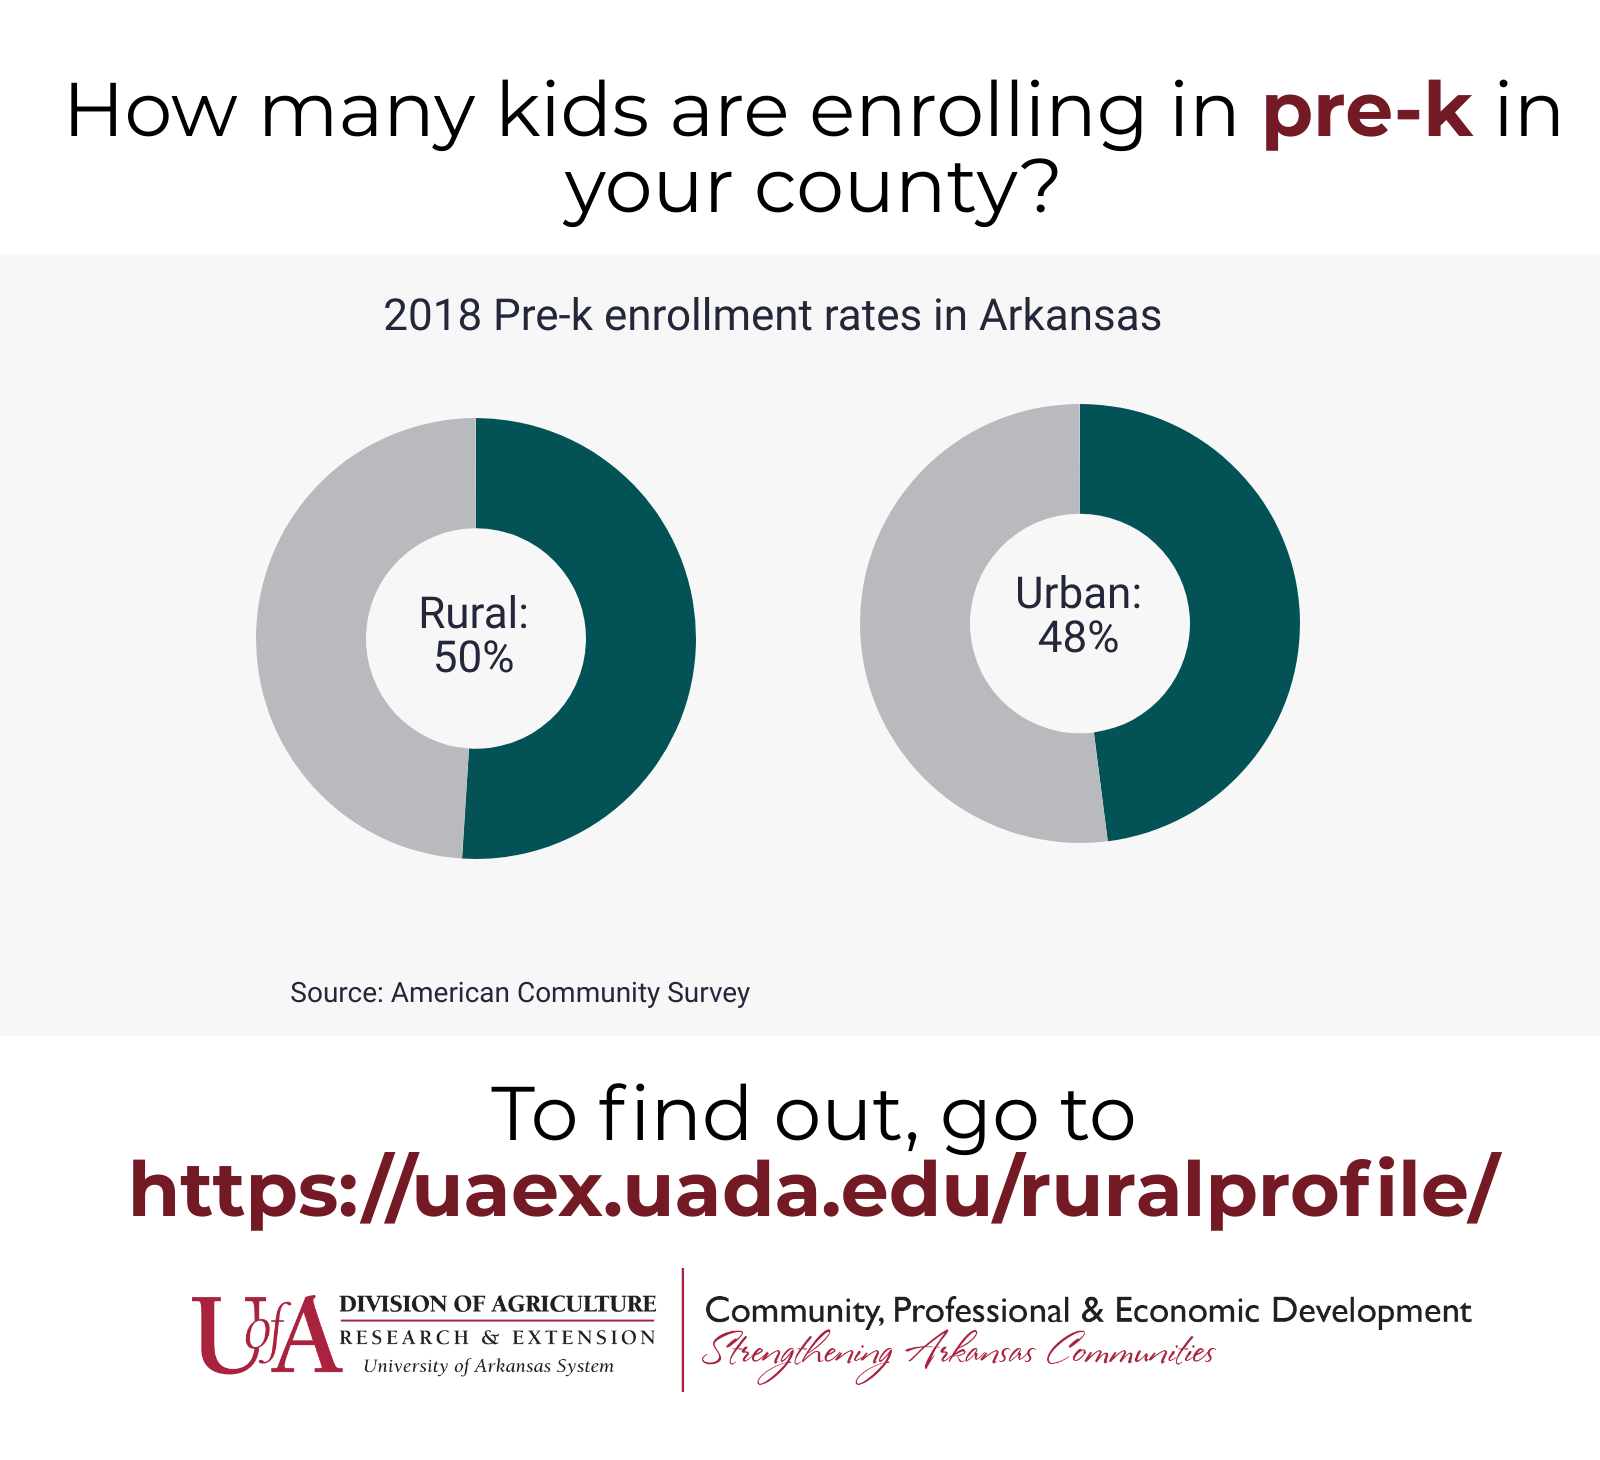 Infographic showing the rate of children in rural and urban Arkansas counties who are enrolled in pre-k. The pre-k enrollment rate is 50% in the Rural region and 48% in the Urban region. Learn about the issues that matter to your community.”Learn about the issues that matter to your community at www.uaex.uada.edu/ruralprofile